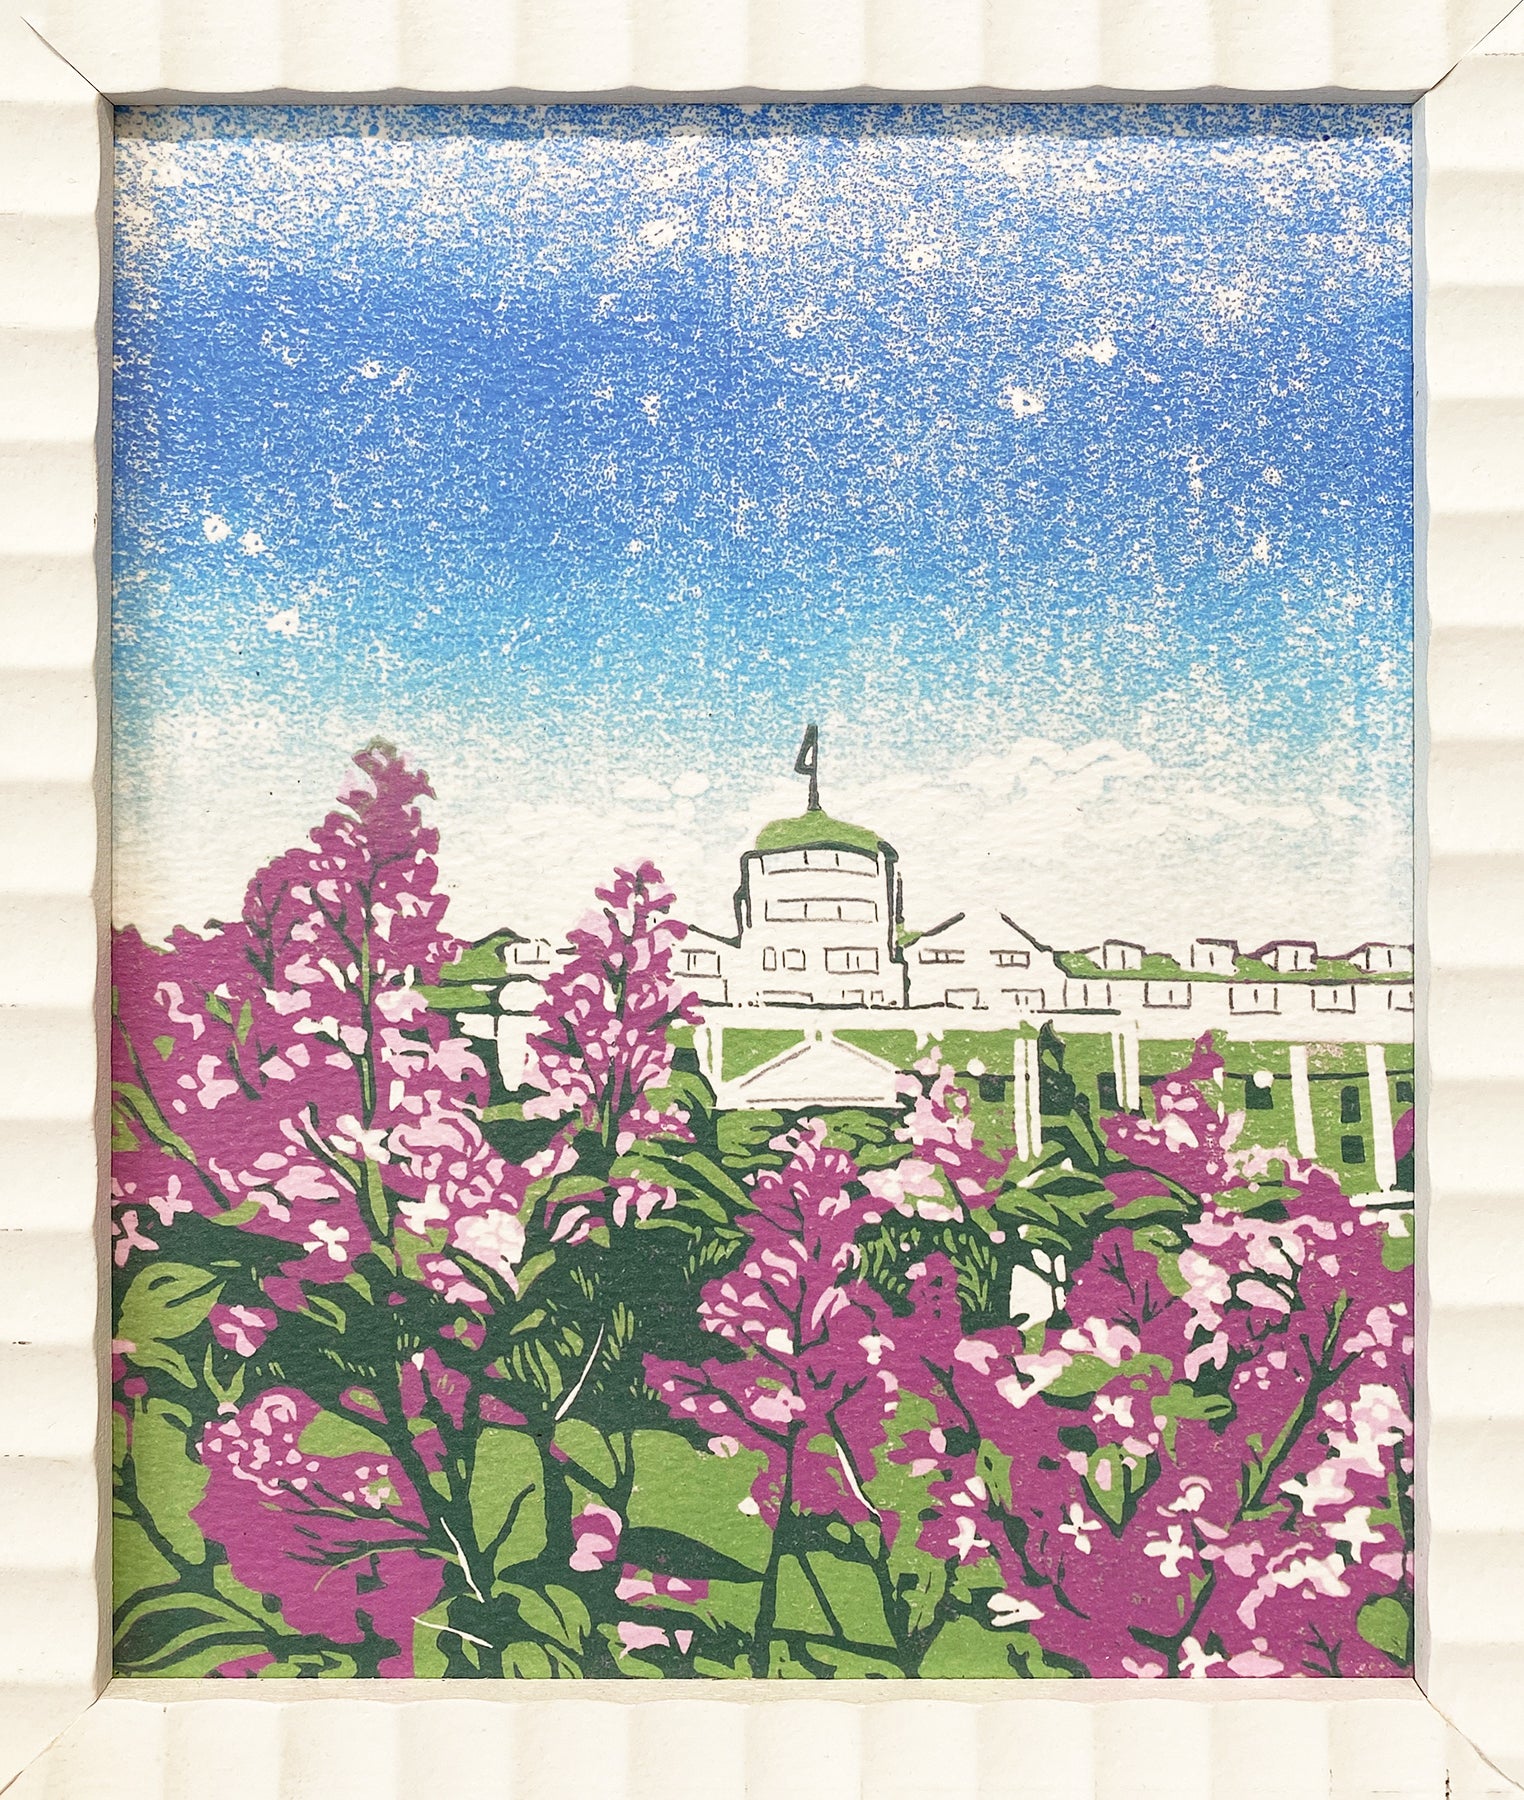 Each June, lilacs create a canopy of fragrance on Mackinac Island. This block print design was inspired by lovely lilacs blooming in the Tea Garden of the Grand Hotel. 